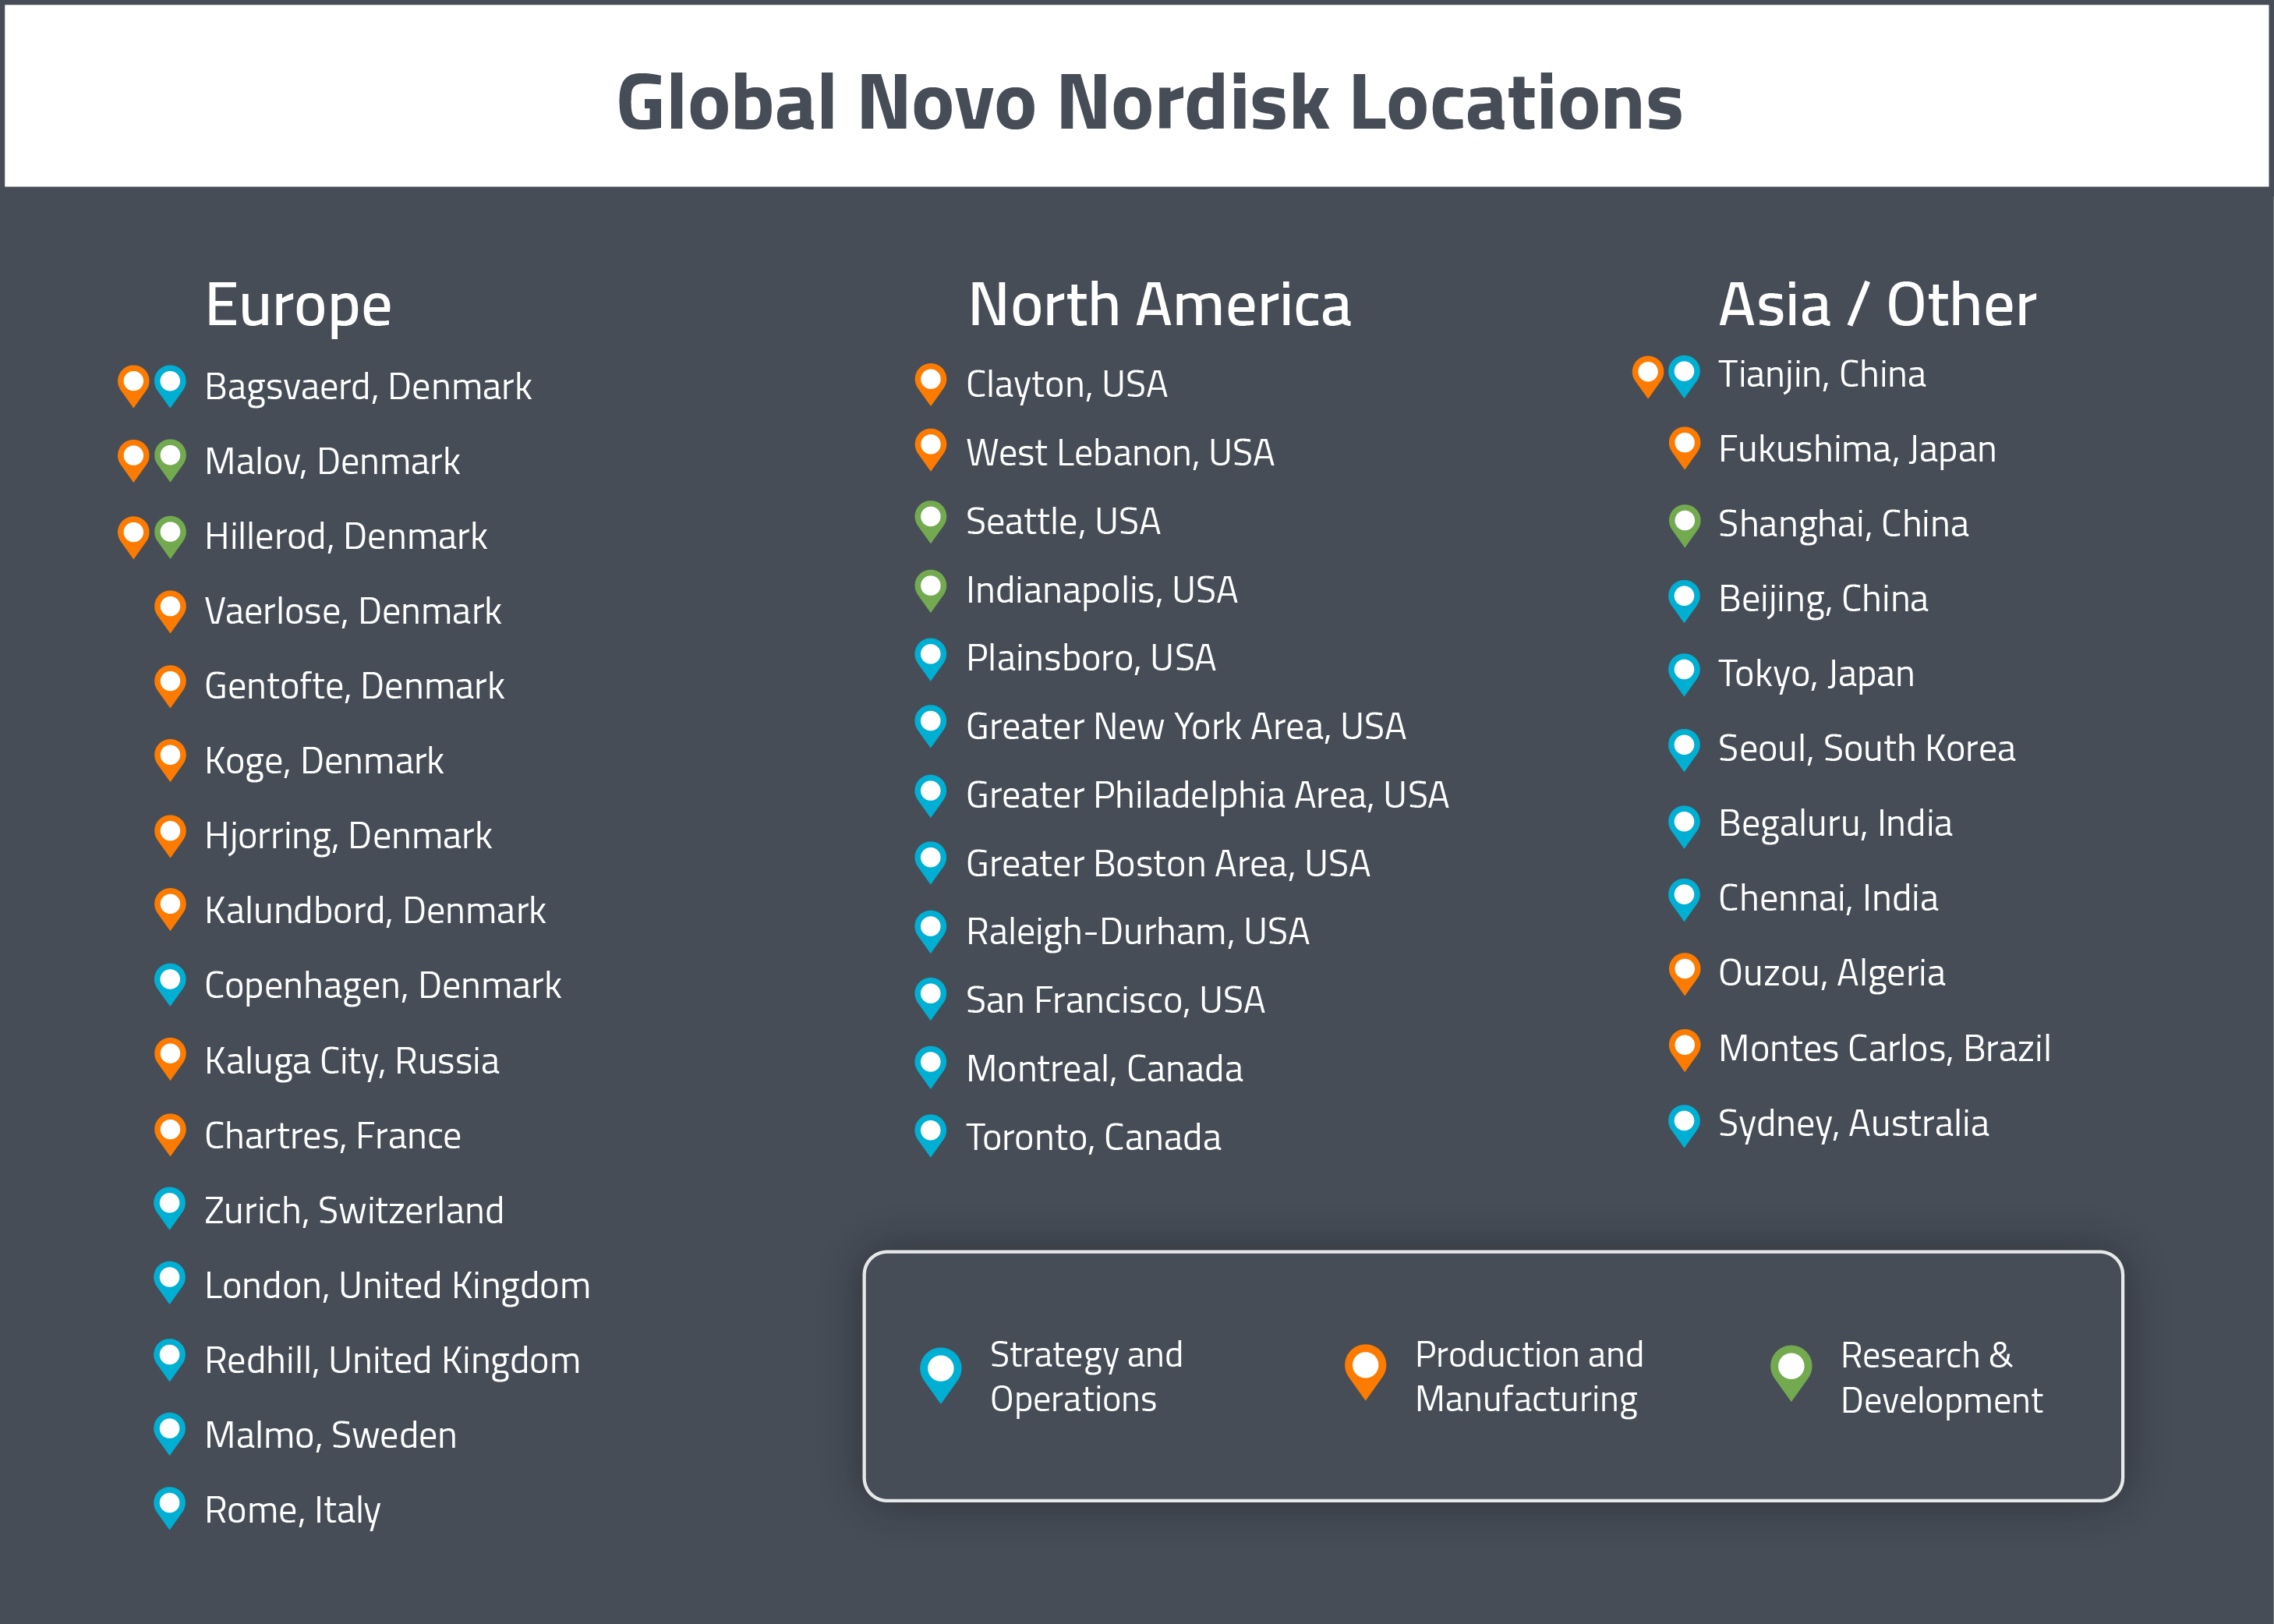 A map of Novo Nordisk's Global Drug Development and Manufacturing locations 2